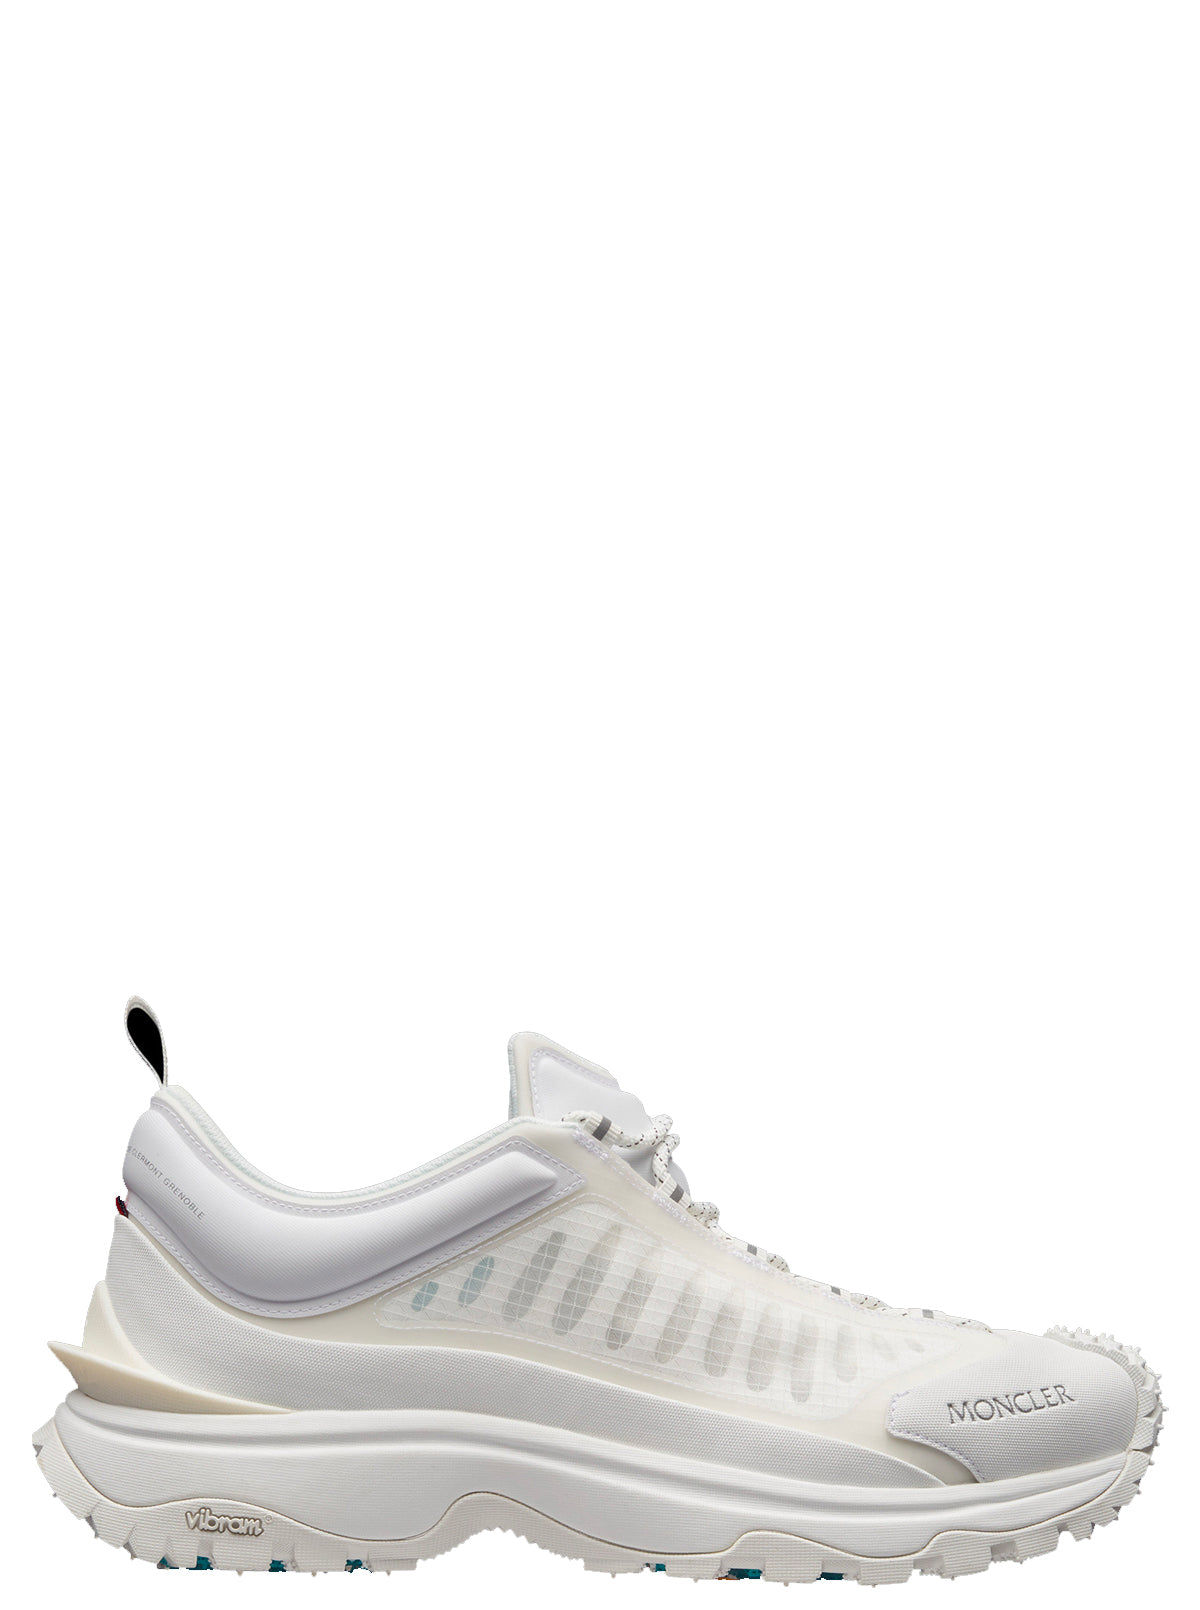 MONCLER - Sneakers TrailGrip Lite blanche